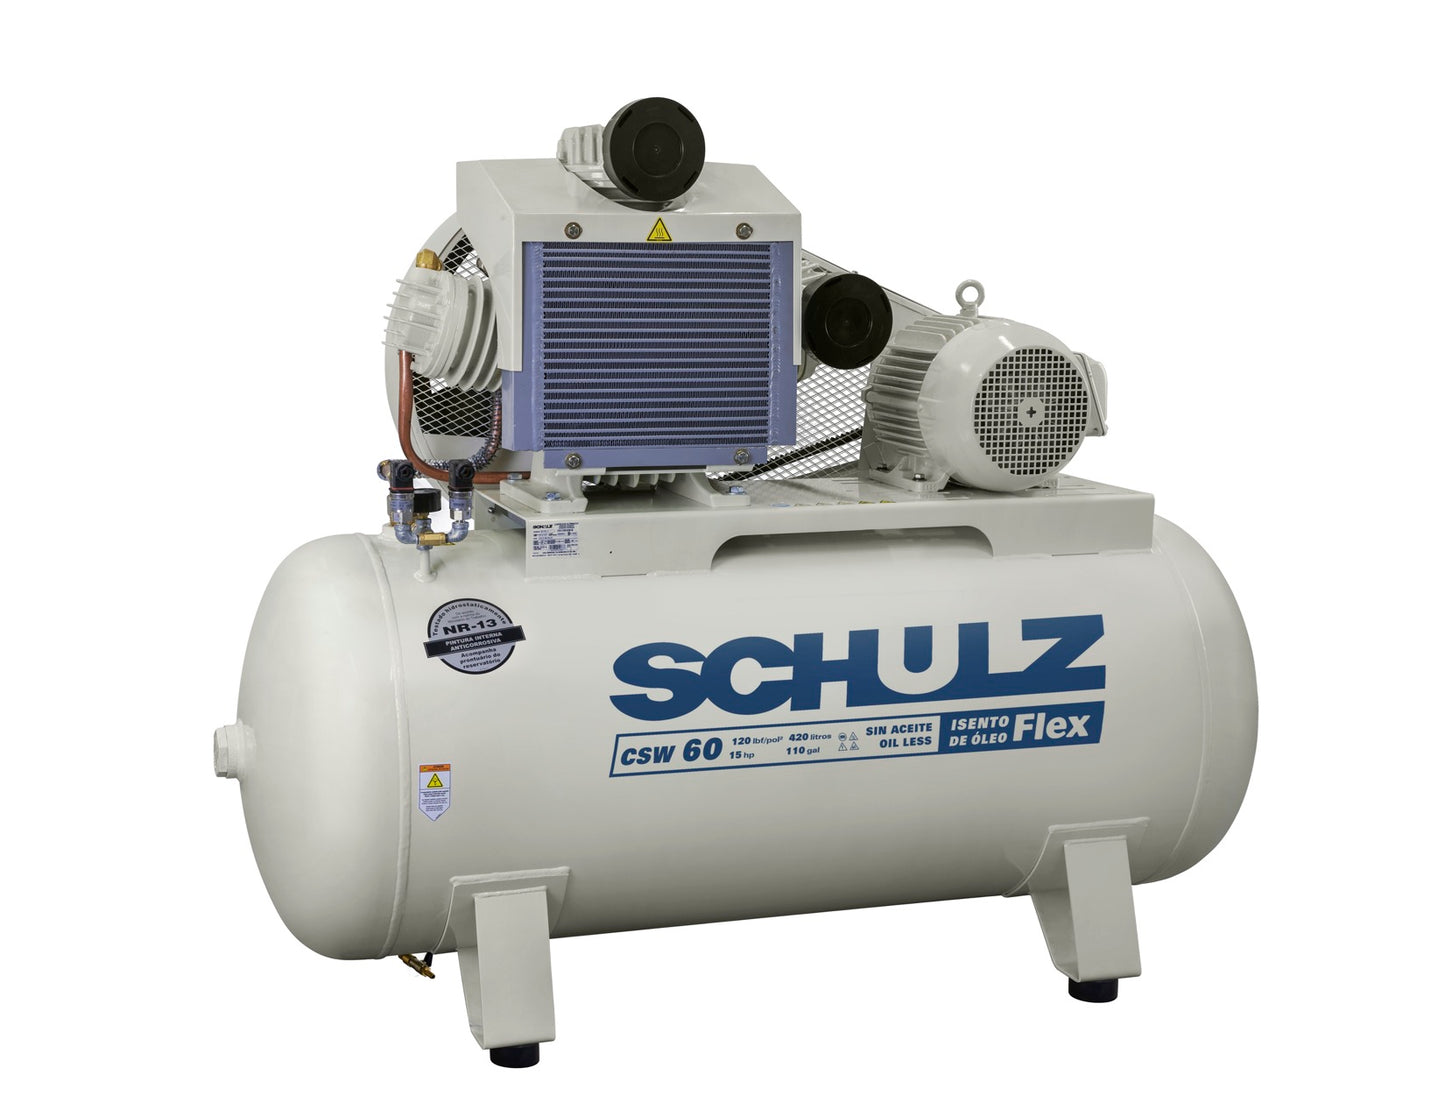 Schulz of America 15120HW60-3 120 PSI Two-Stage Oil-Less Horizontal Air Compressor